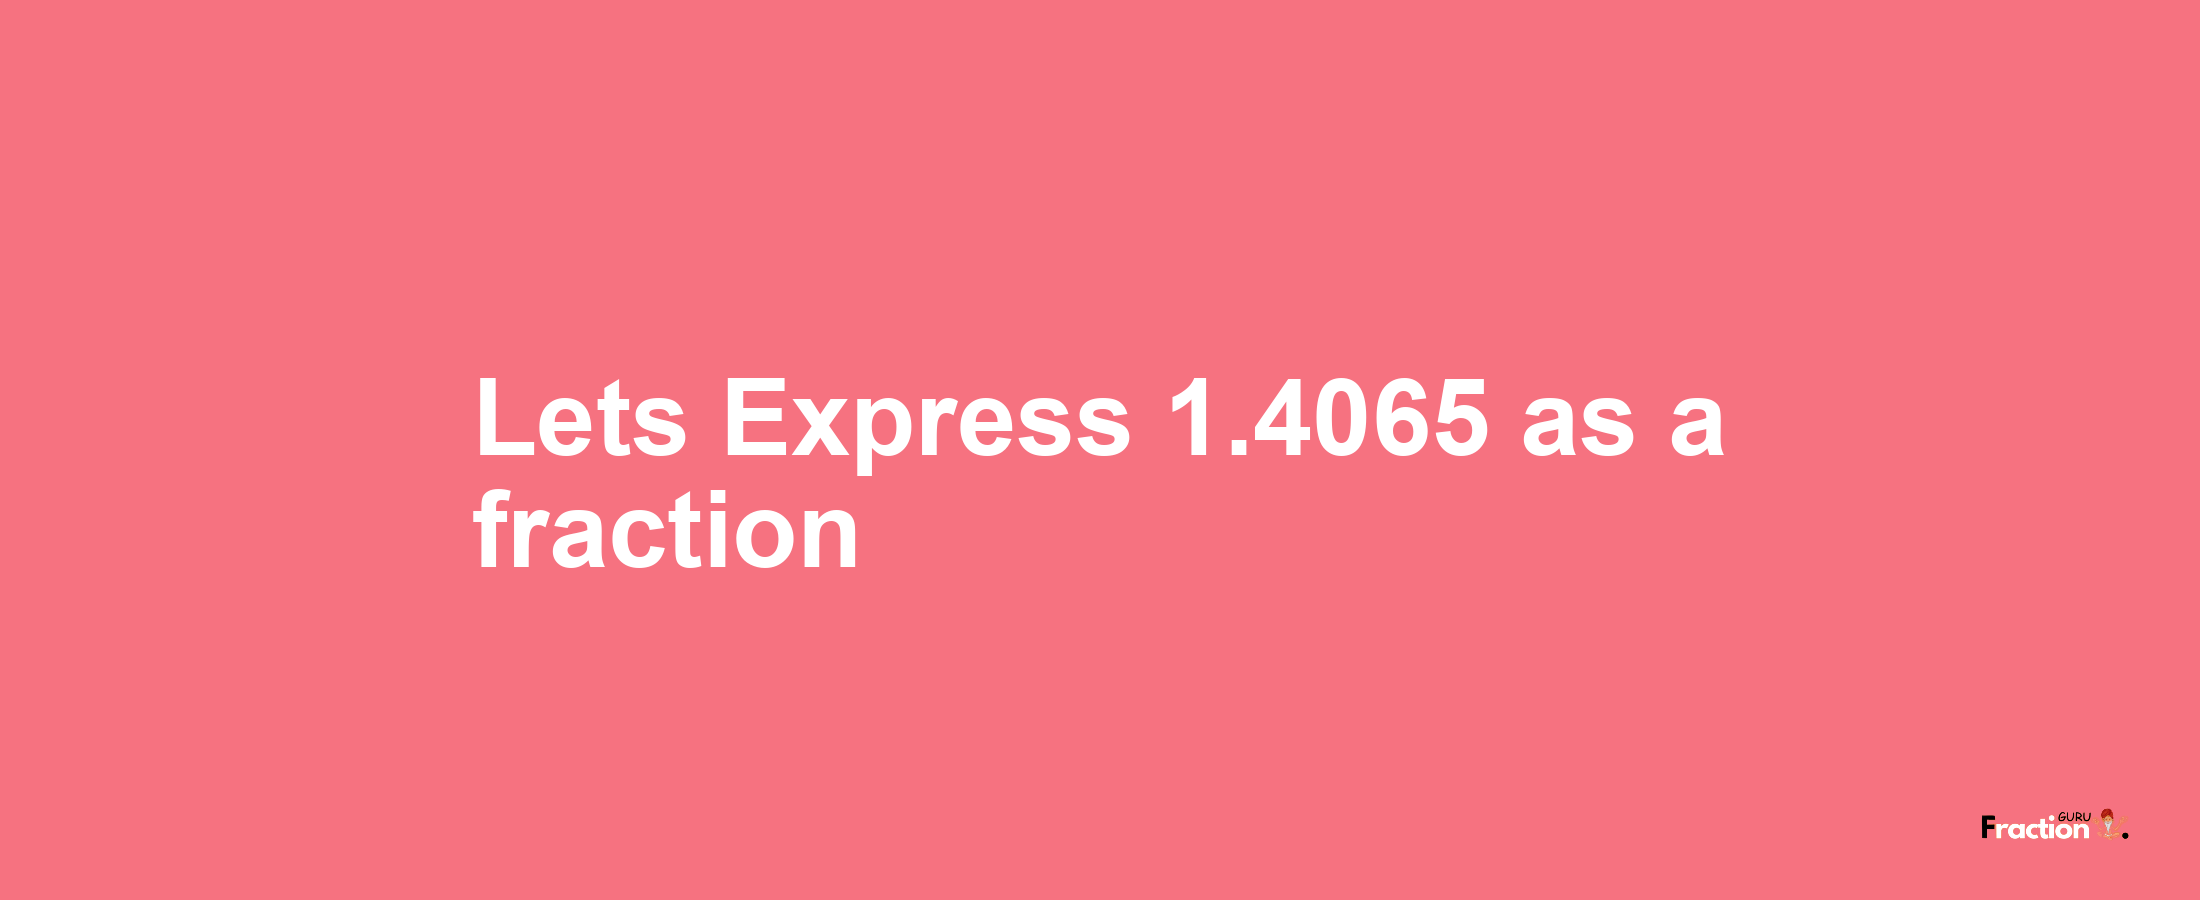 Lets Express 1.4065 as afraction